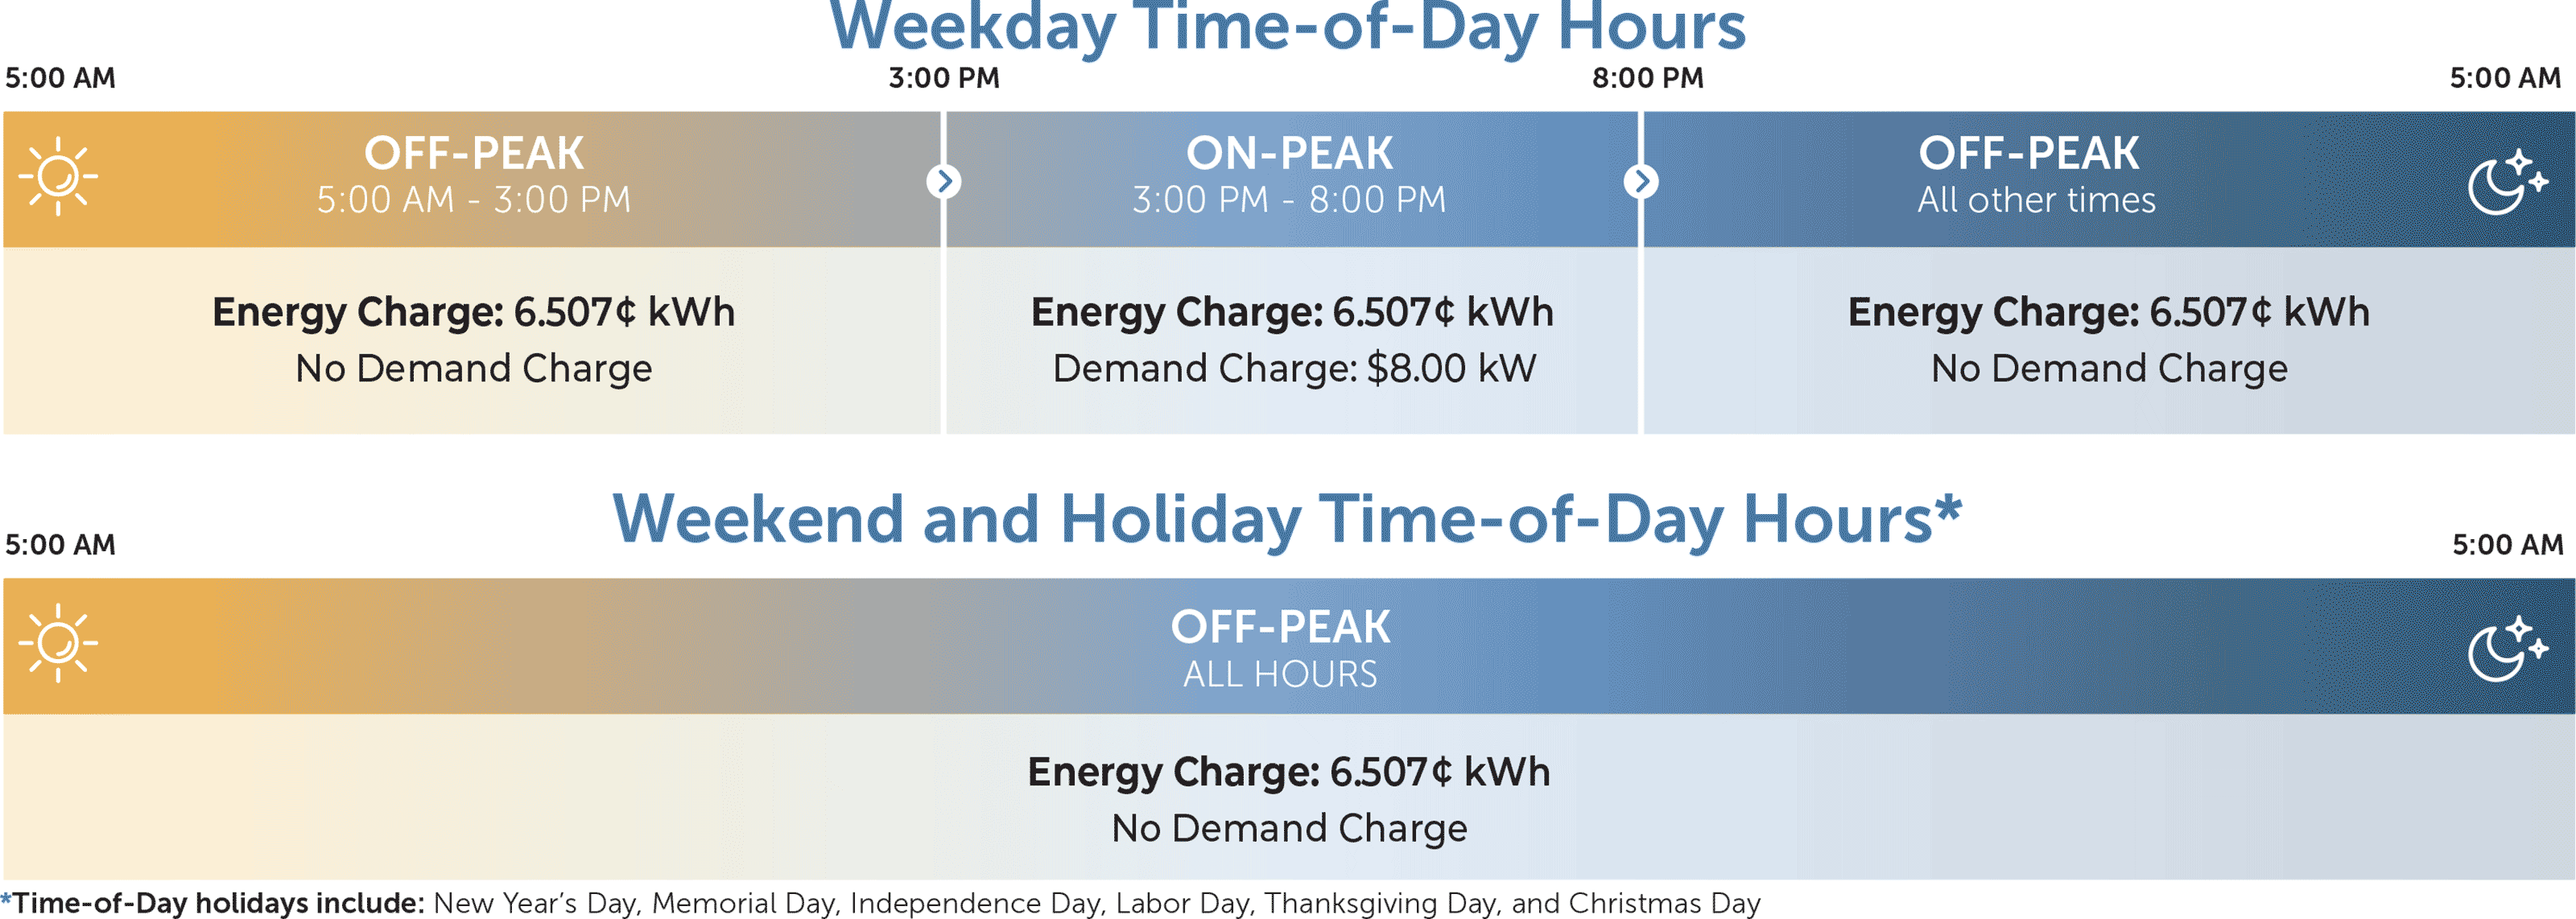 Weekday, Weekend, and Holiday Time-of-Day Hours